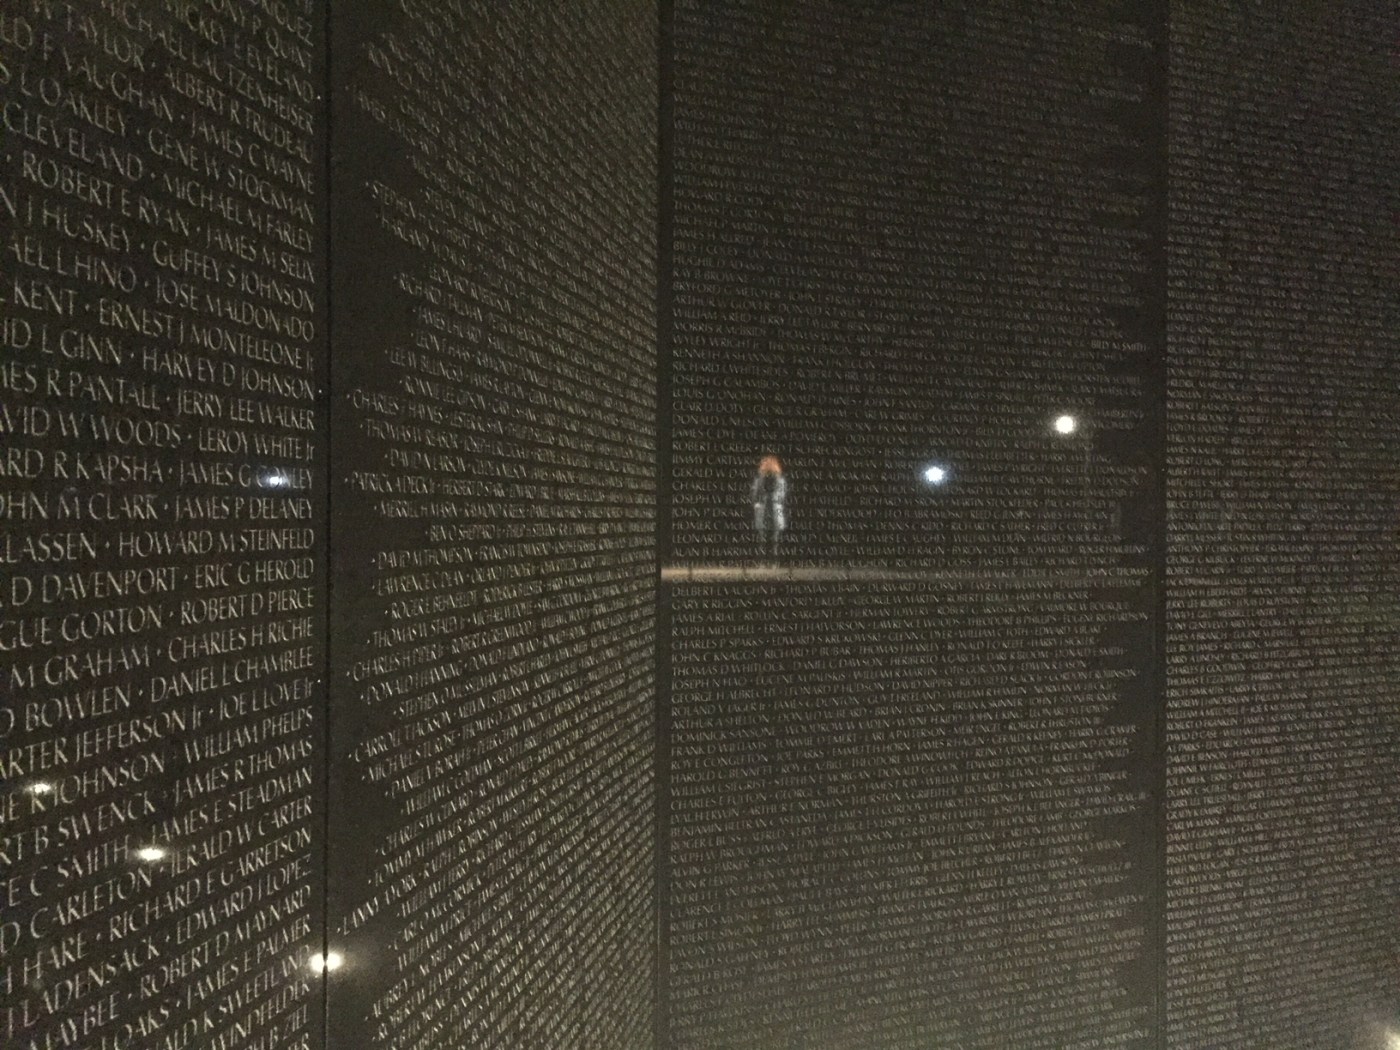 Reflection of woman reading names on the wall